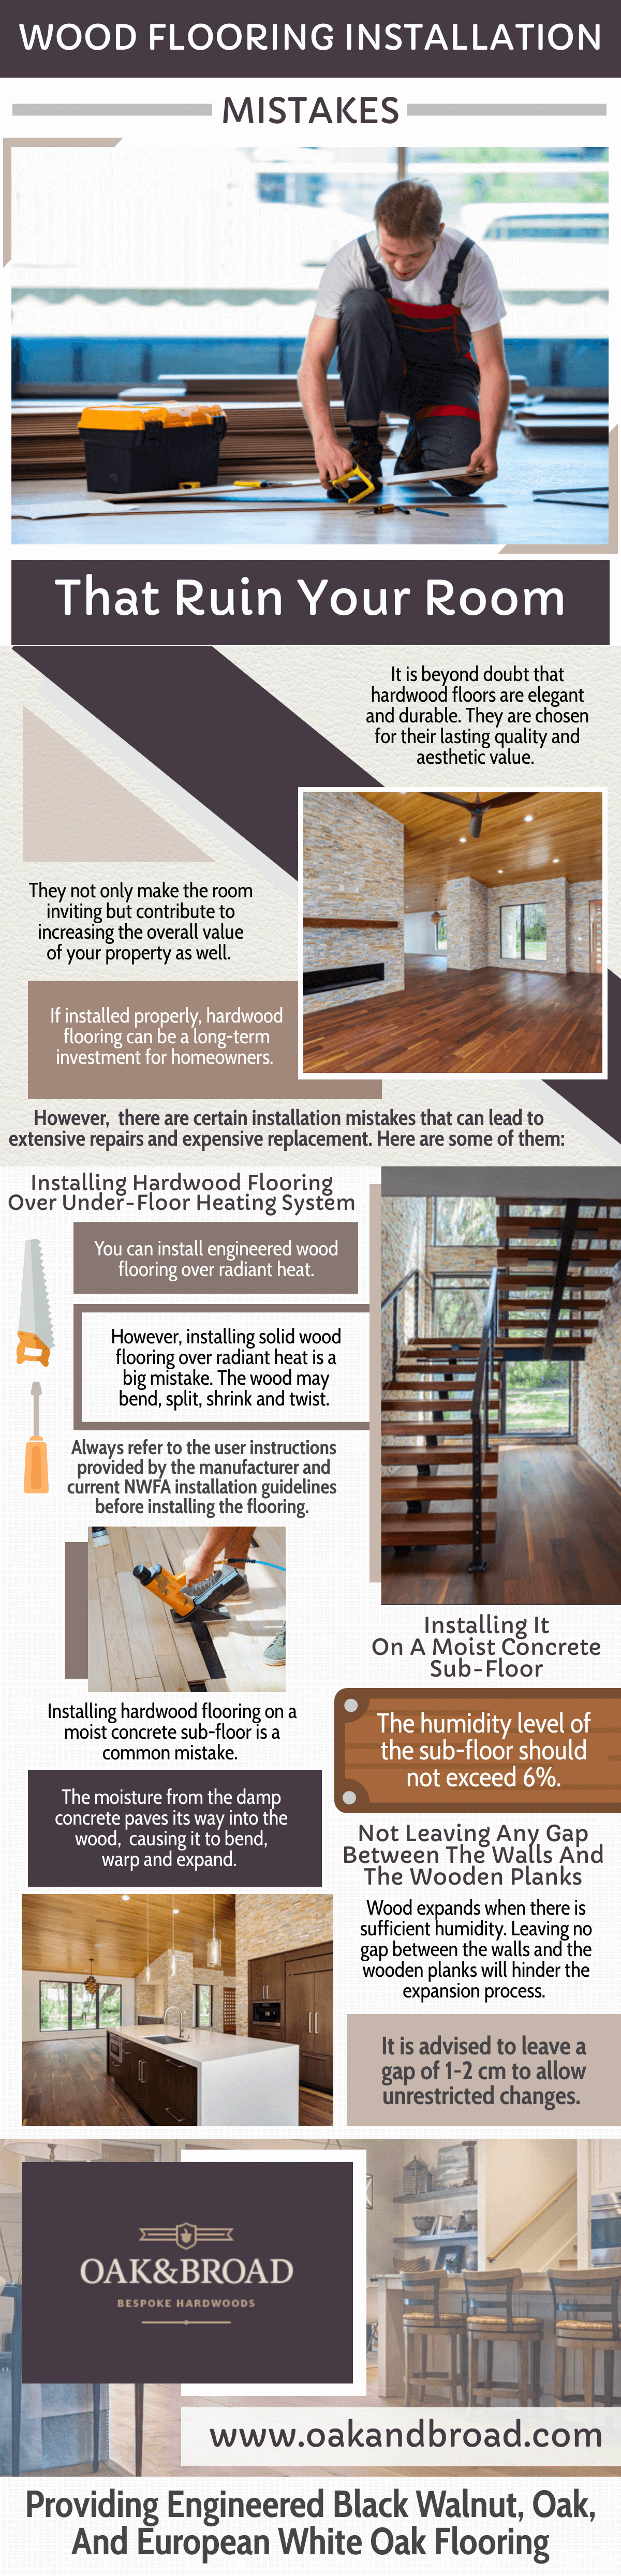 Wood Flooring Installation Mistakes That Ruin Your Room